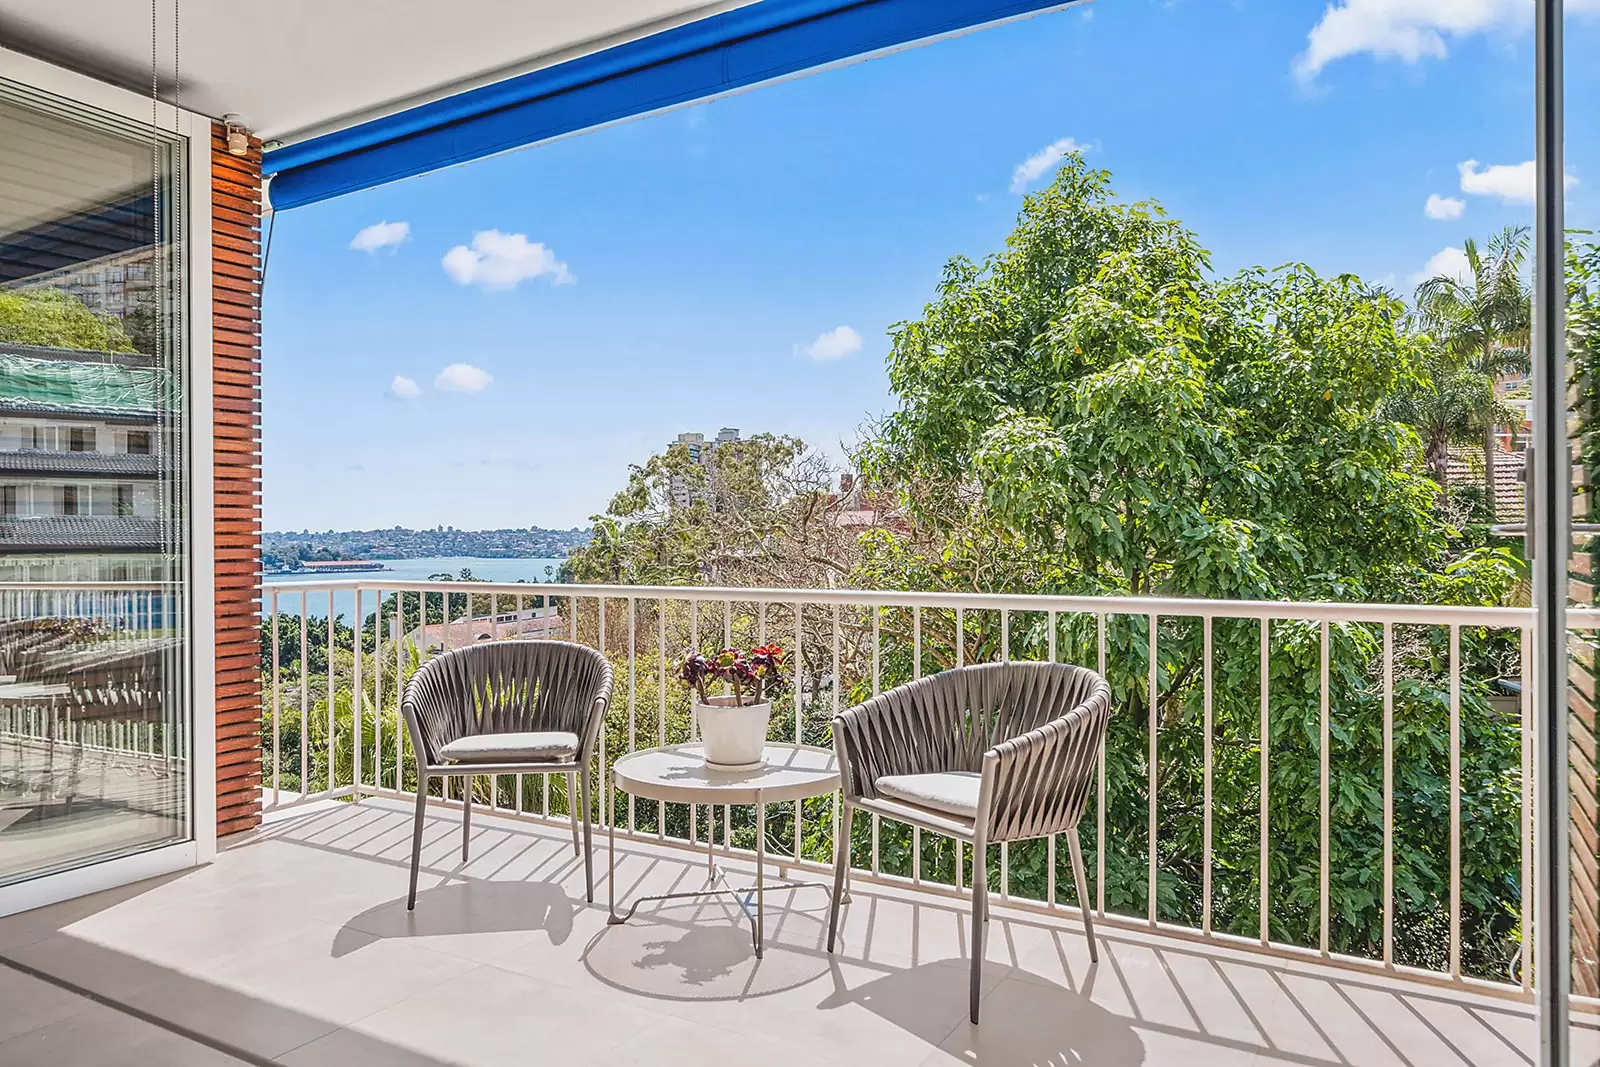 Photo #7: 59/11 Yarranabbe Road, Darling Point - Sold by Sydney Sotheby's International Realty